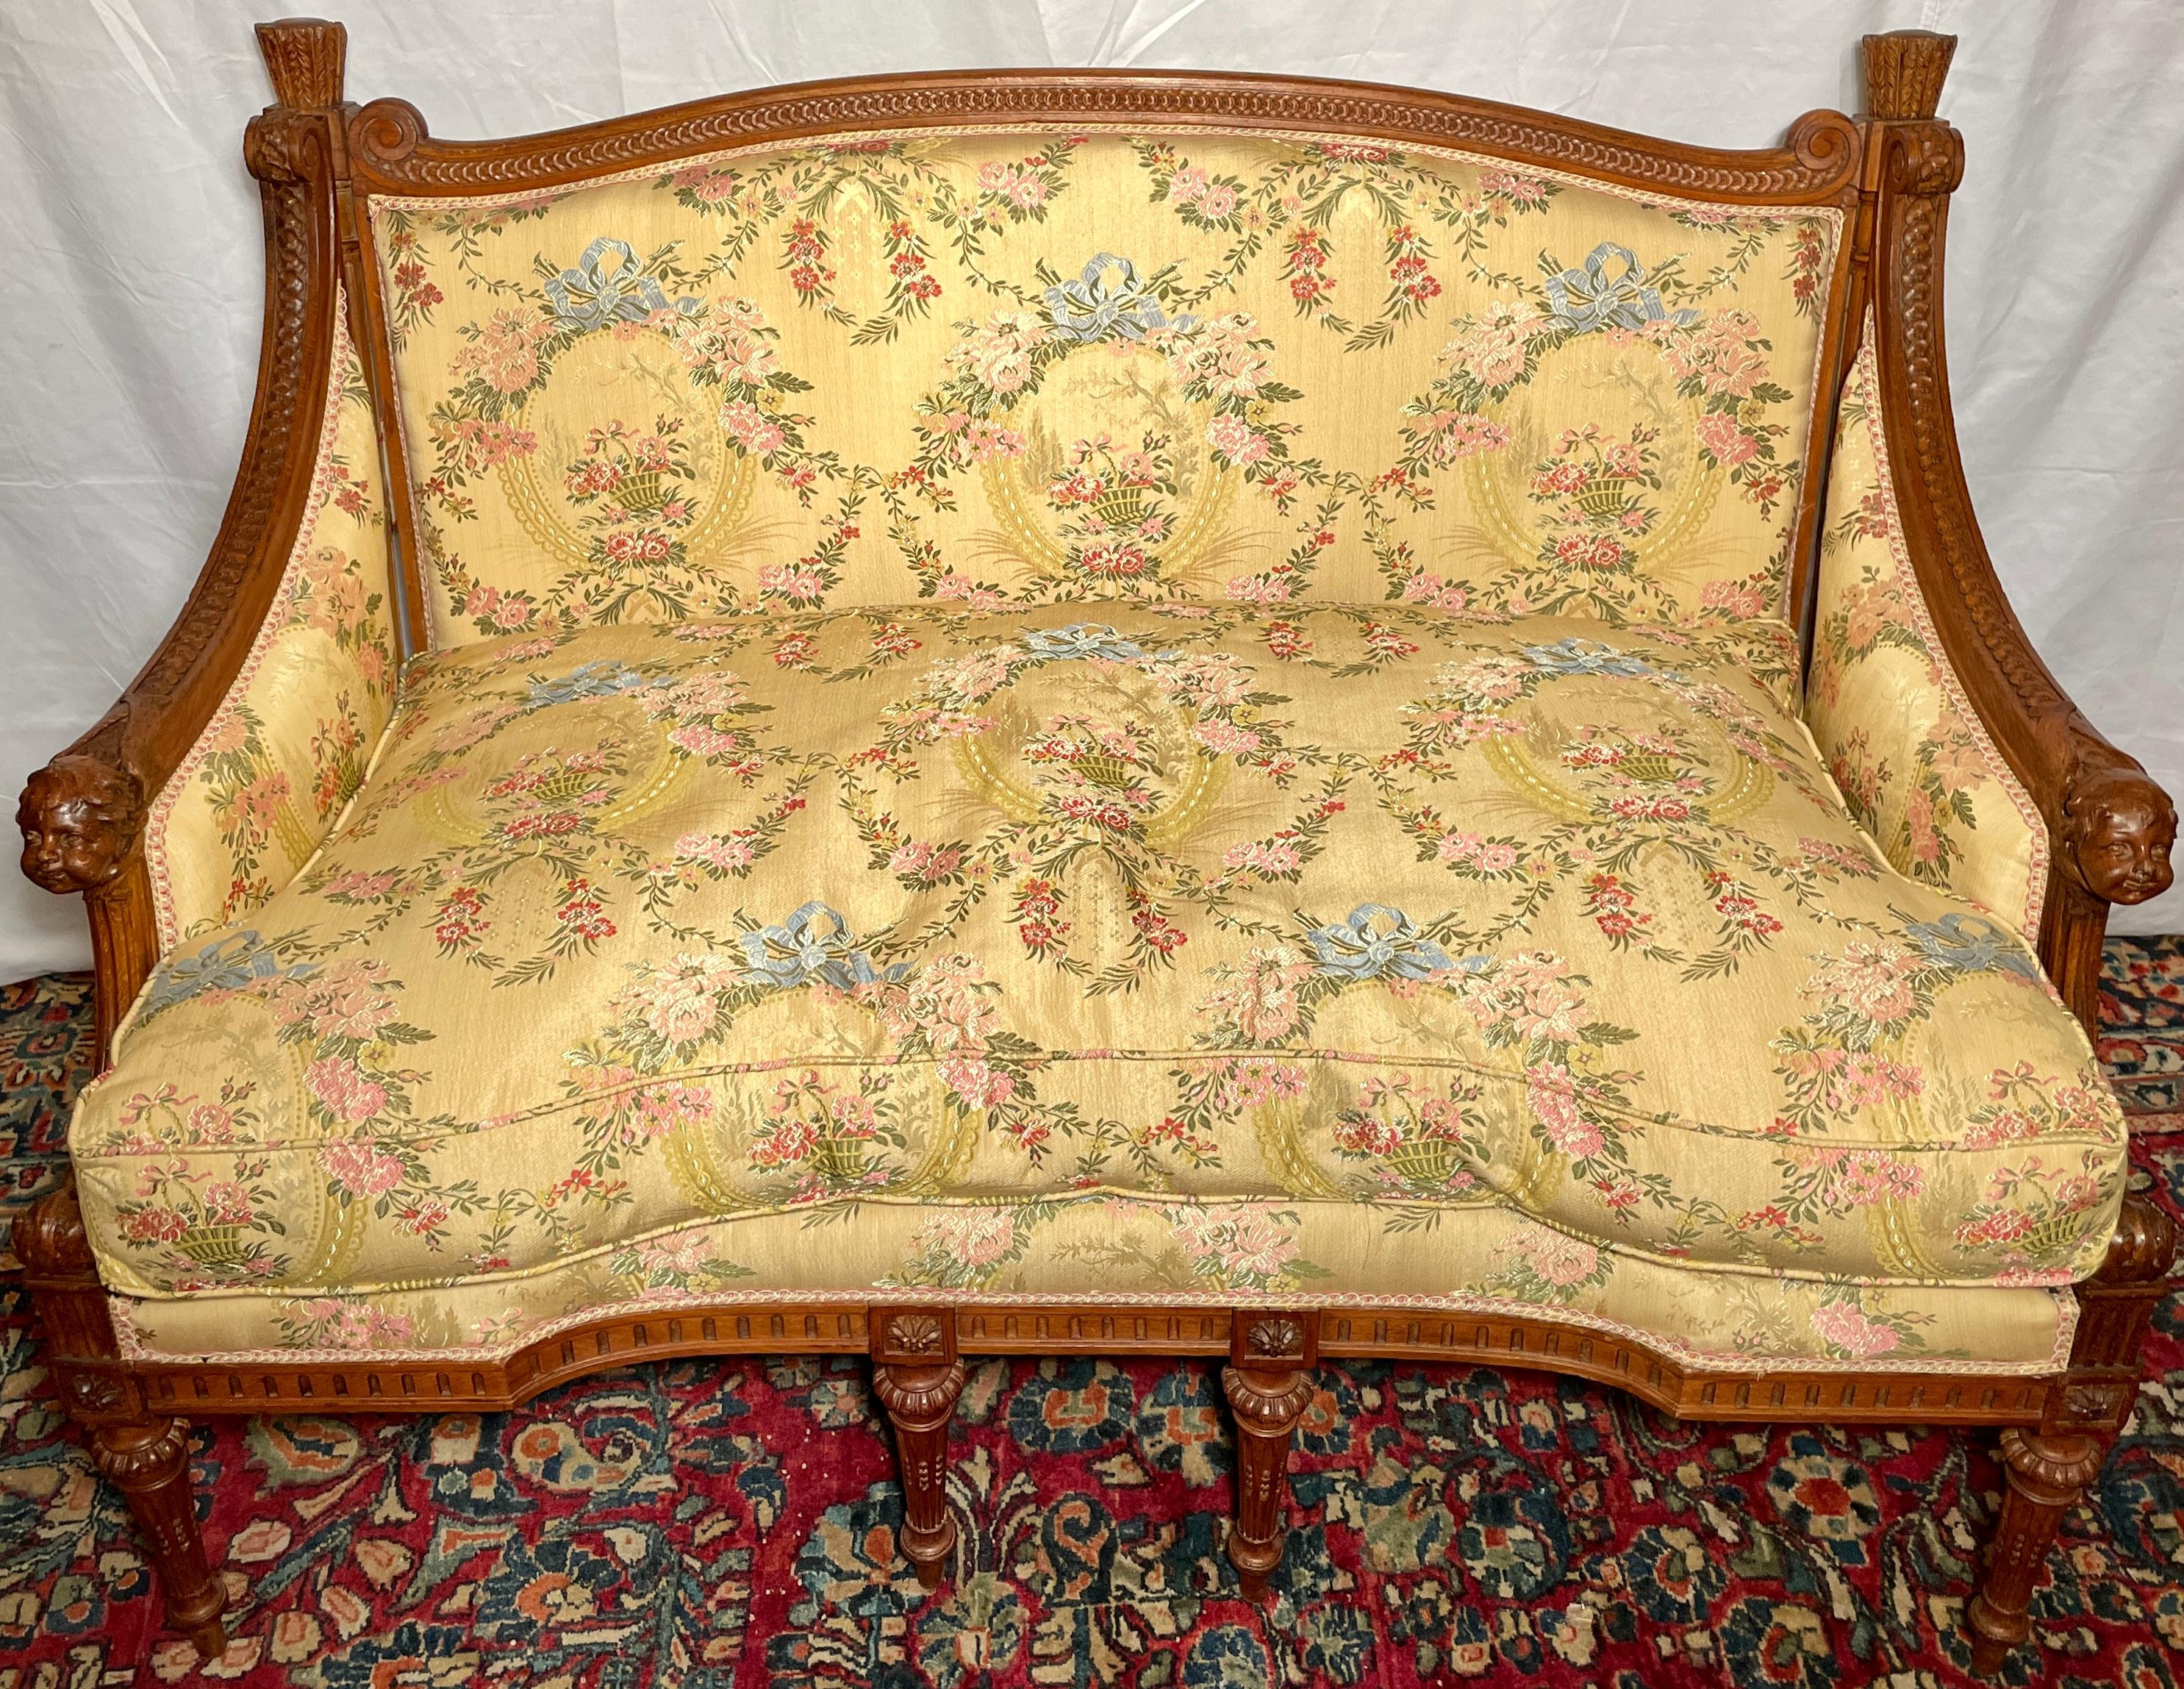 Antique French carved walnut canapé settee, circa 1860. 
Beautiful period-correct yellow silk upholstery. 